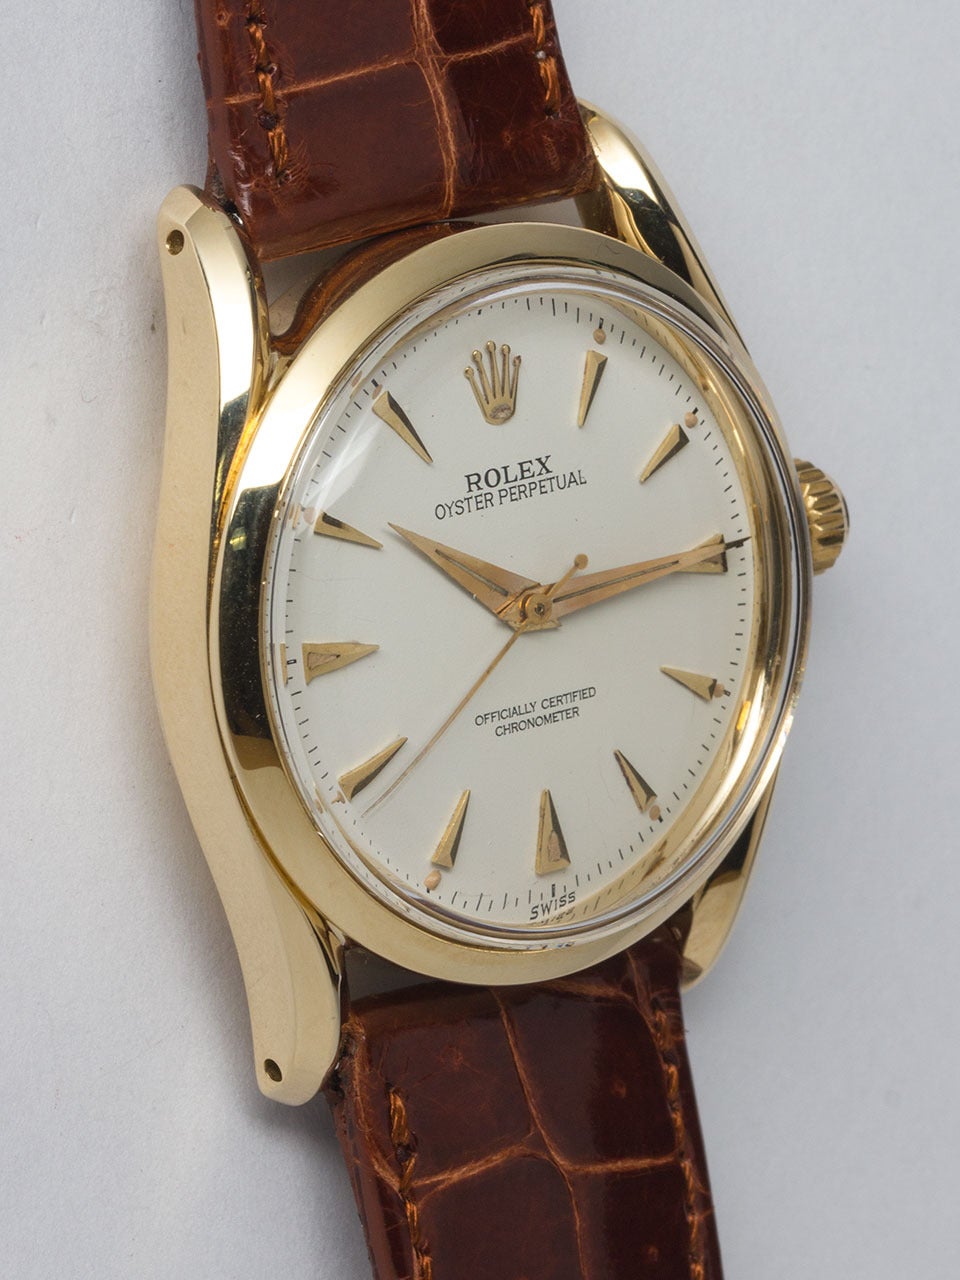 Rolex 14K Yellow Gold Bombe ref 6292 serial# 948,xxx circa 1953. 34 x 40mm bombe style case with bowed lugs, smooth bezel and acrylic crystal. Beautifully restored antique white dial with gold applied tapered indexes and hands. Powered by Rolex